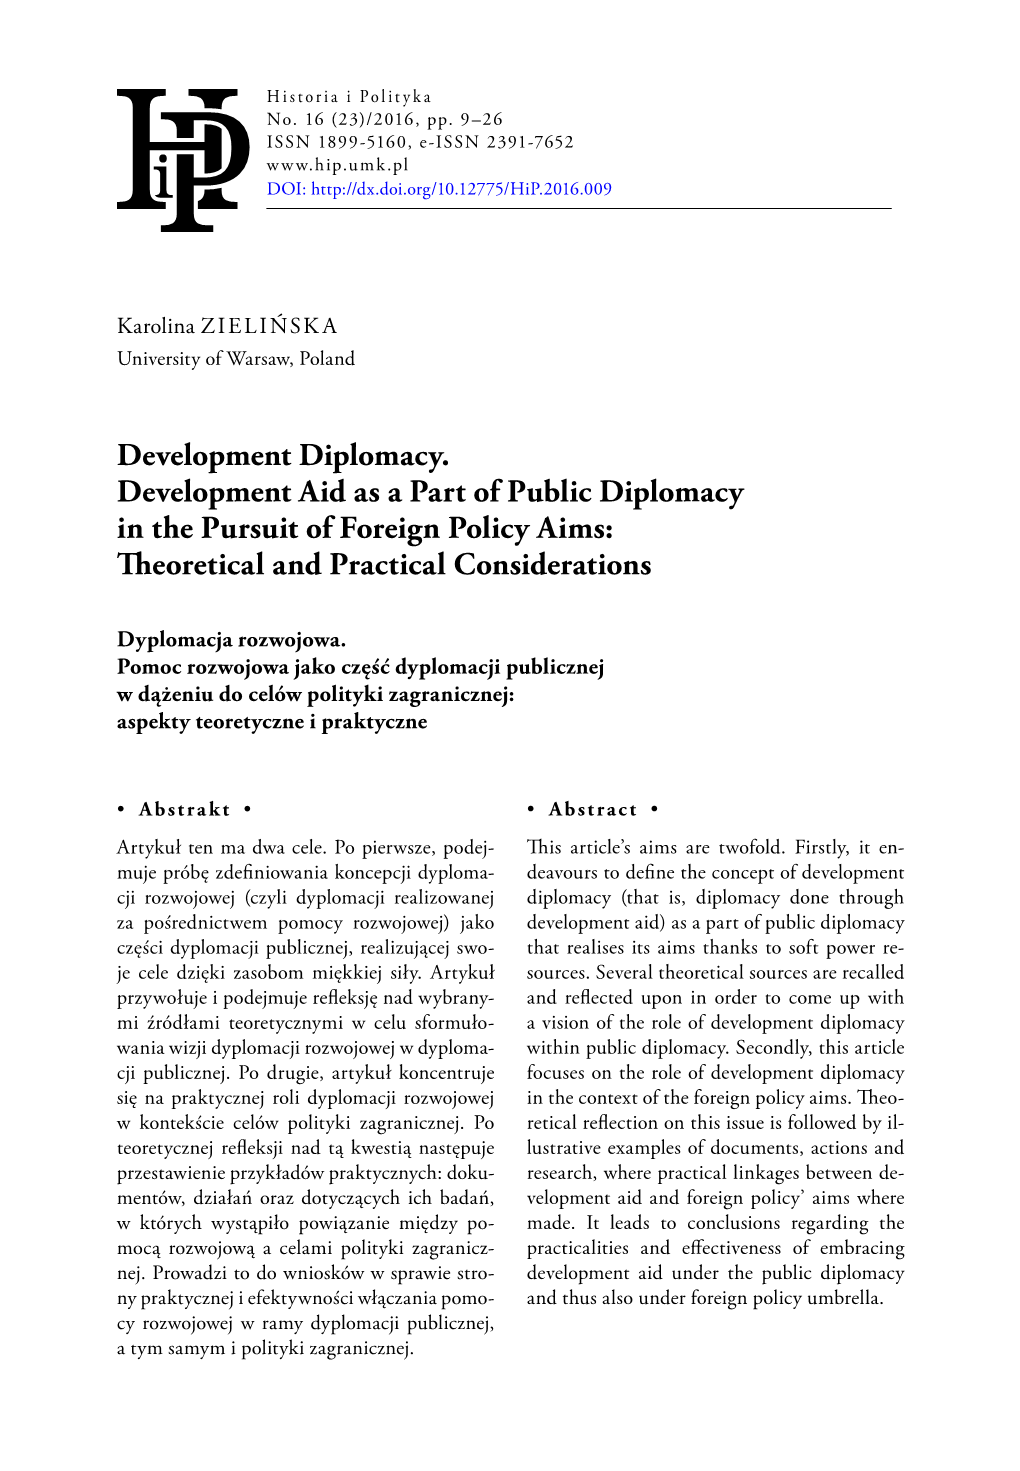 Development Diplomacy. Development Aid As a Part of Public Diplomacy in the Pursuit of Foreign Policy Aims: Theoretical and Practical Considerations